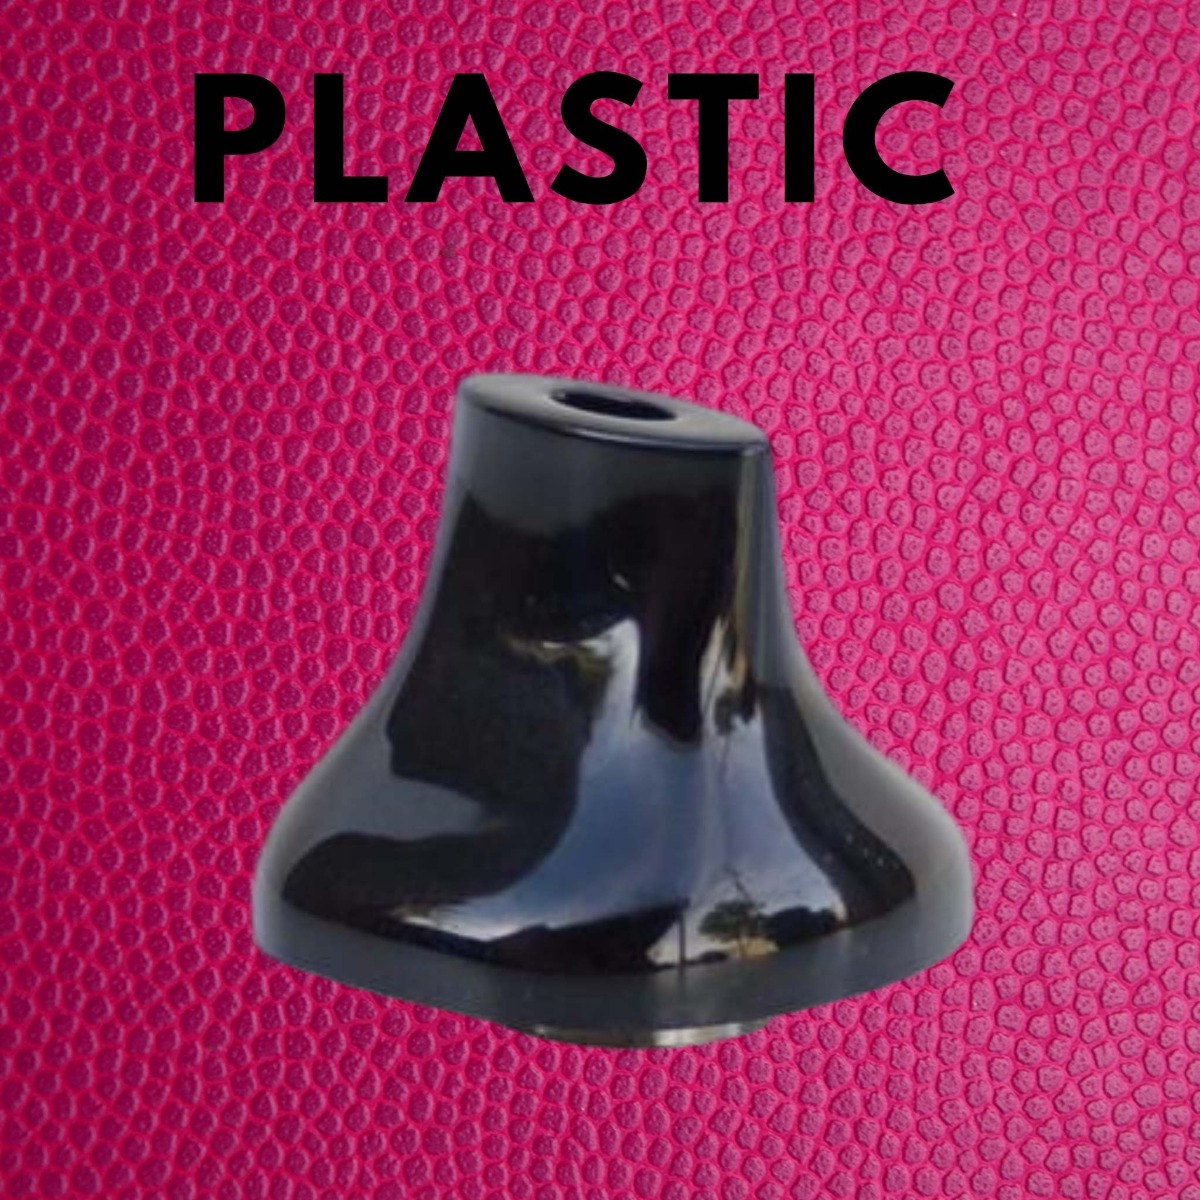 Black titan mouthpiece with text saying plastic above it 